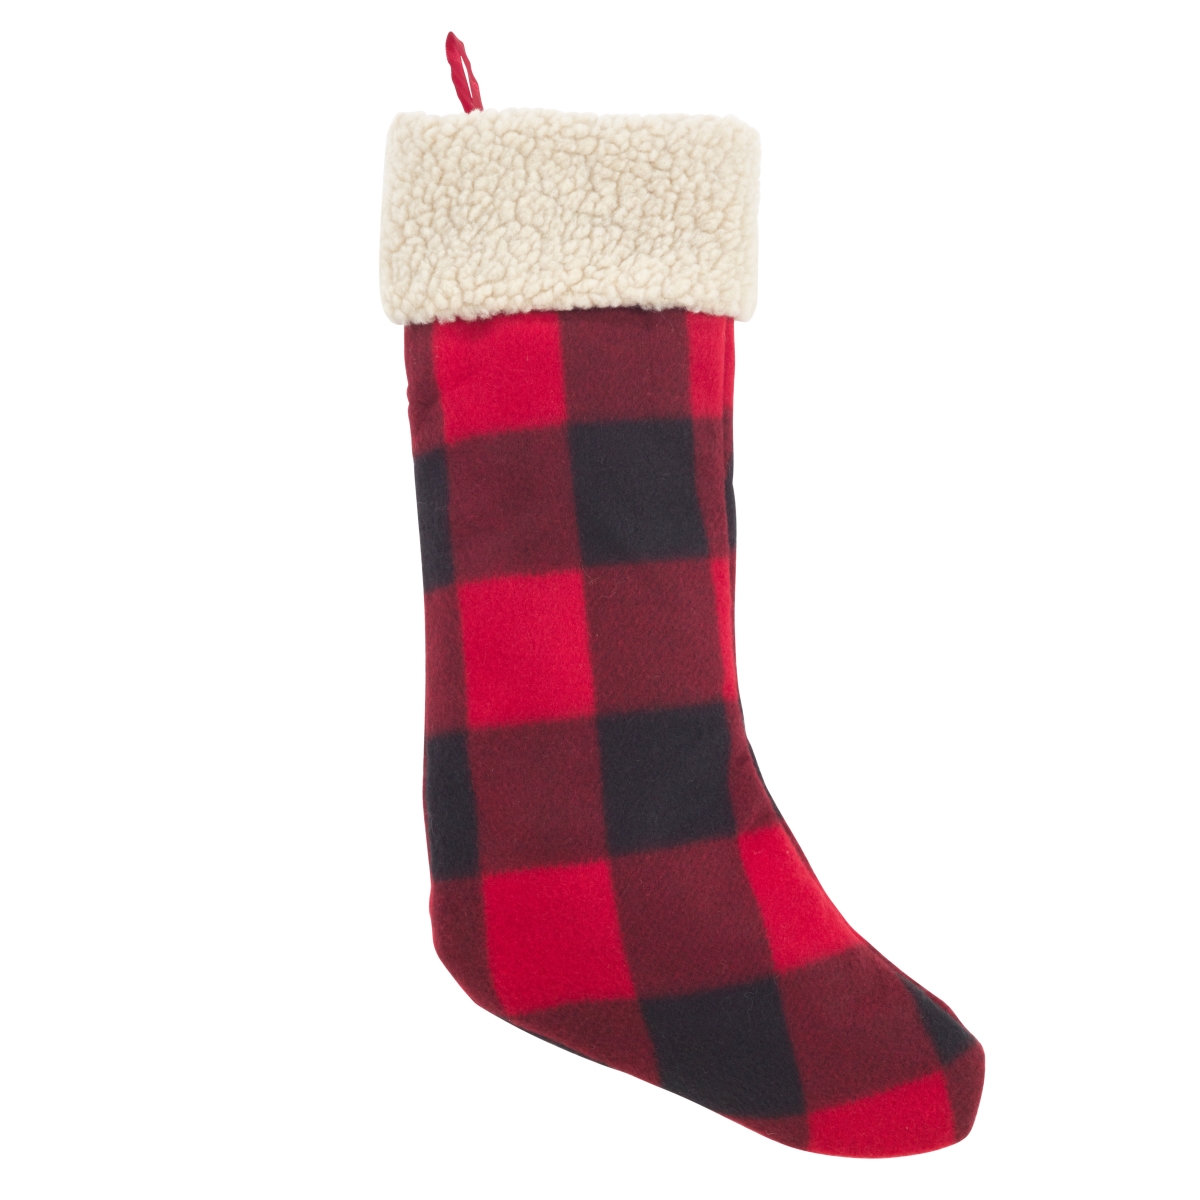 1786.r1018 10 X 18 In. Classic Red & Black Buffalo Plaid Stocking With Sherpa Cuff, Red